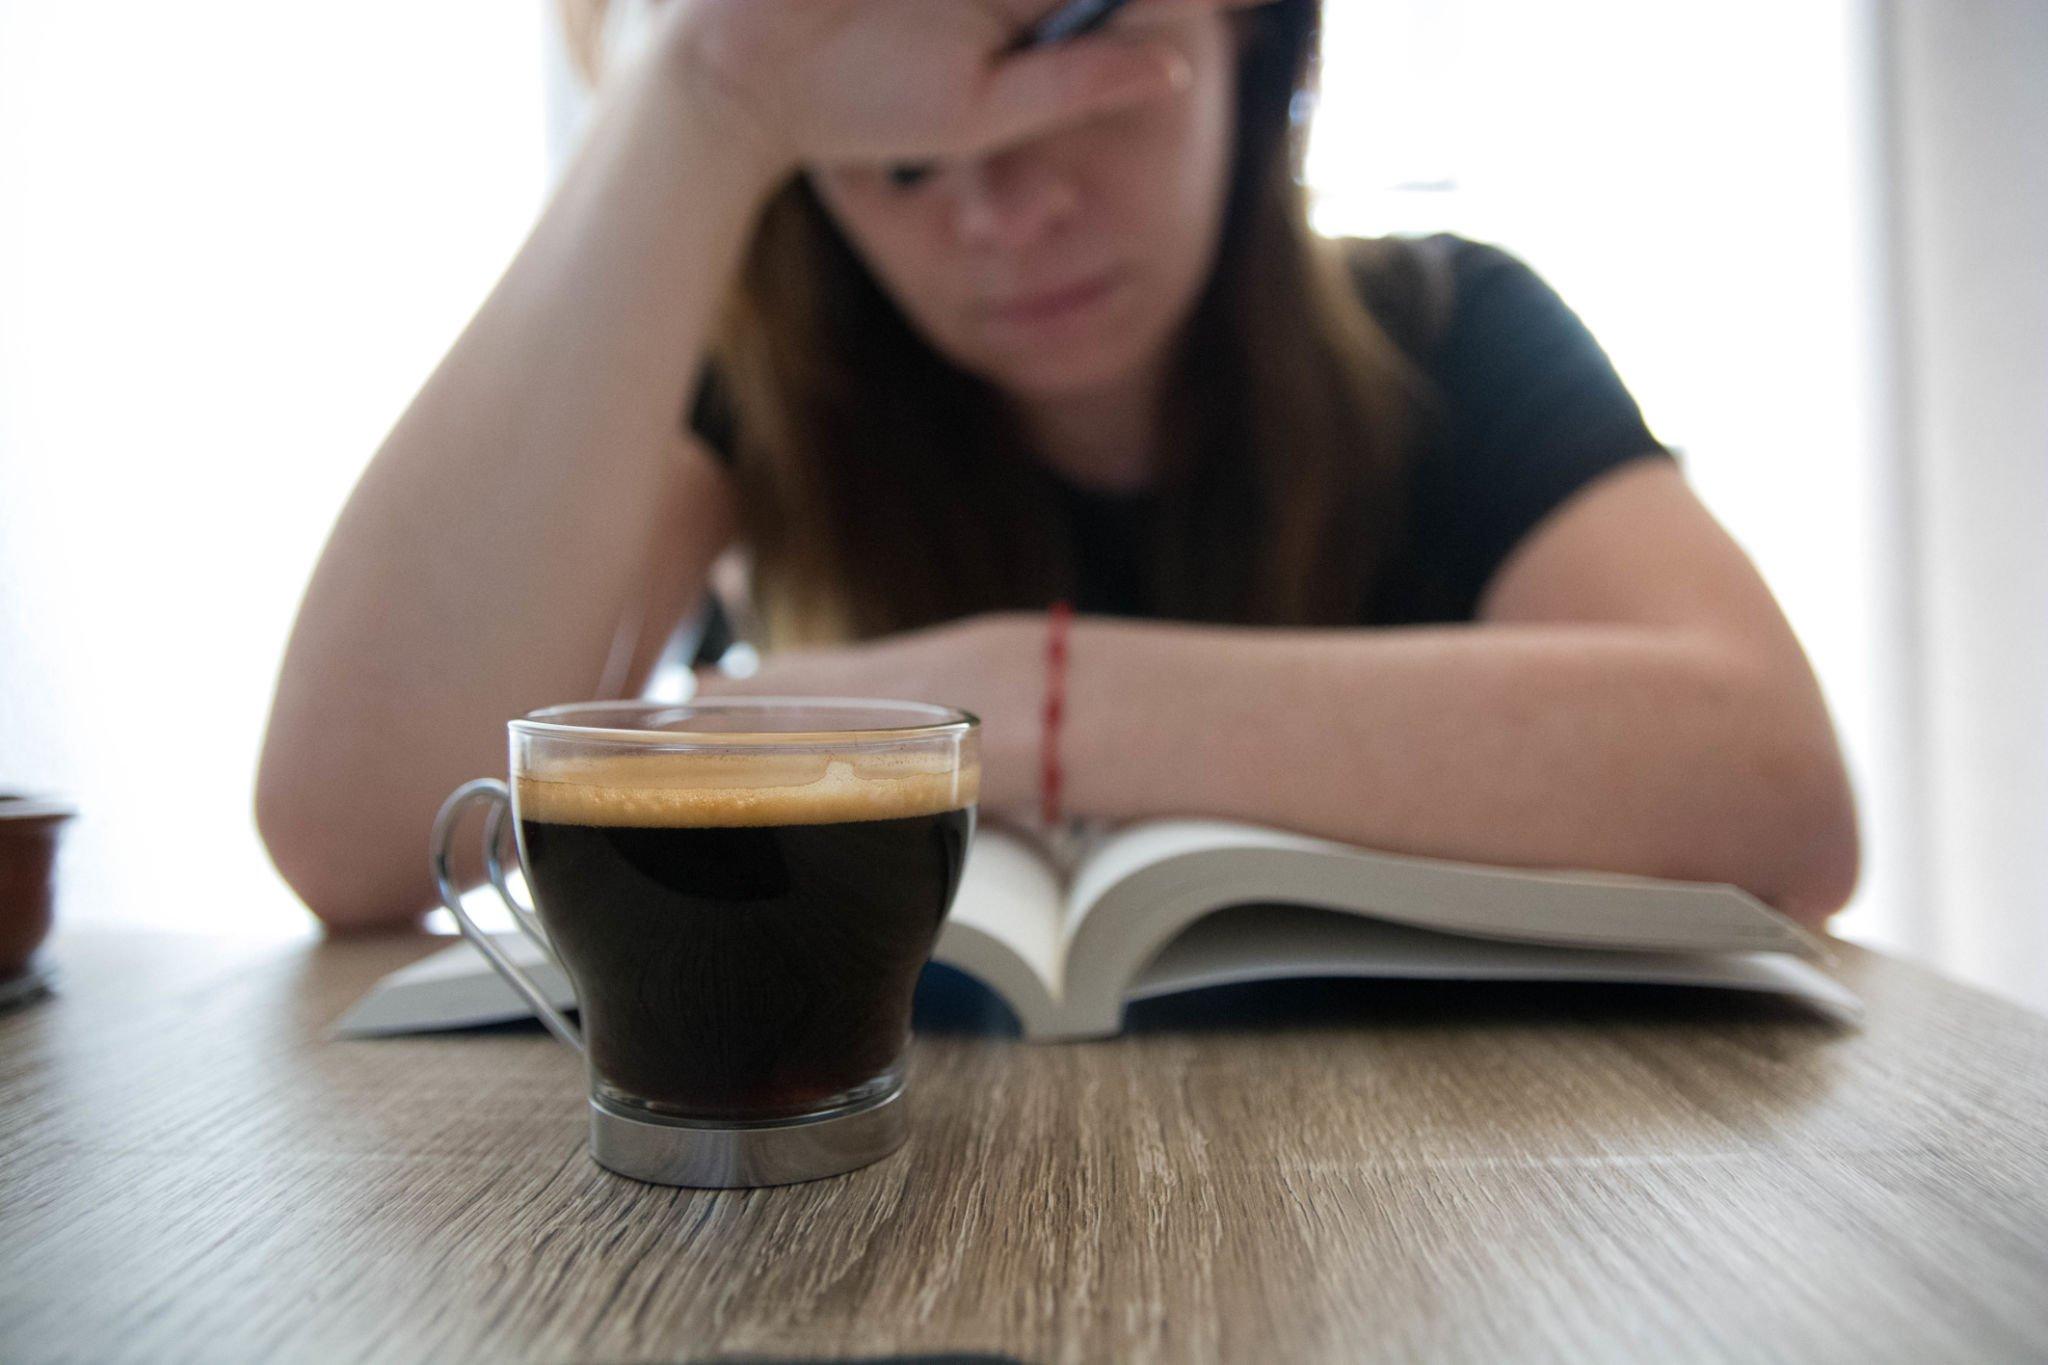 Why Doesn't Caffeine Affect Everyone? What Makes Caffeine Different For Each Person?